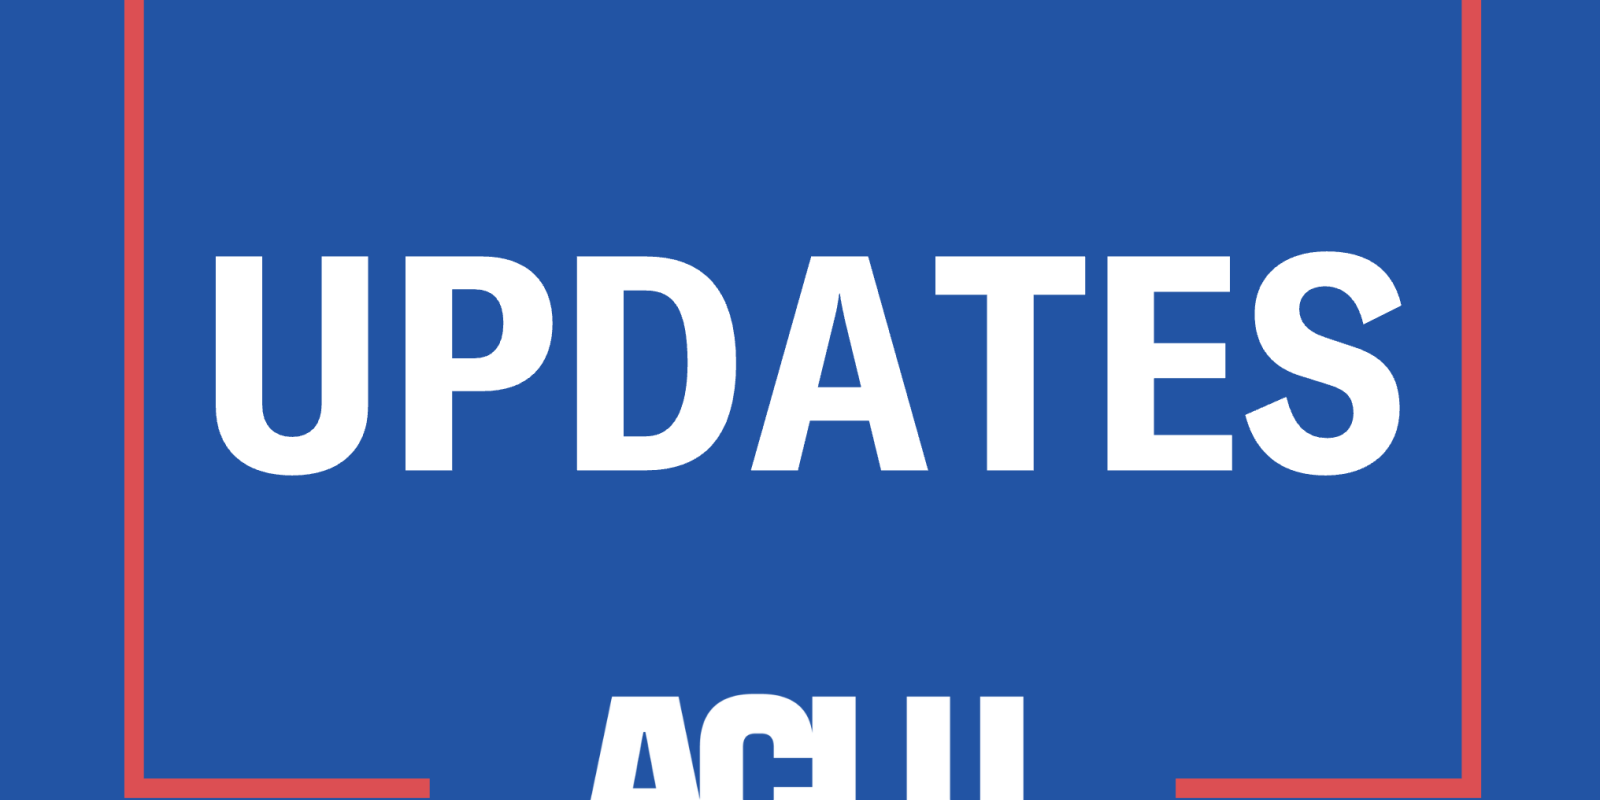 On a blue background, the word "UPDATES" is in the middle of a red lined rectangle with the logo in white in the middle bottom of the square.